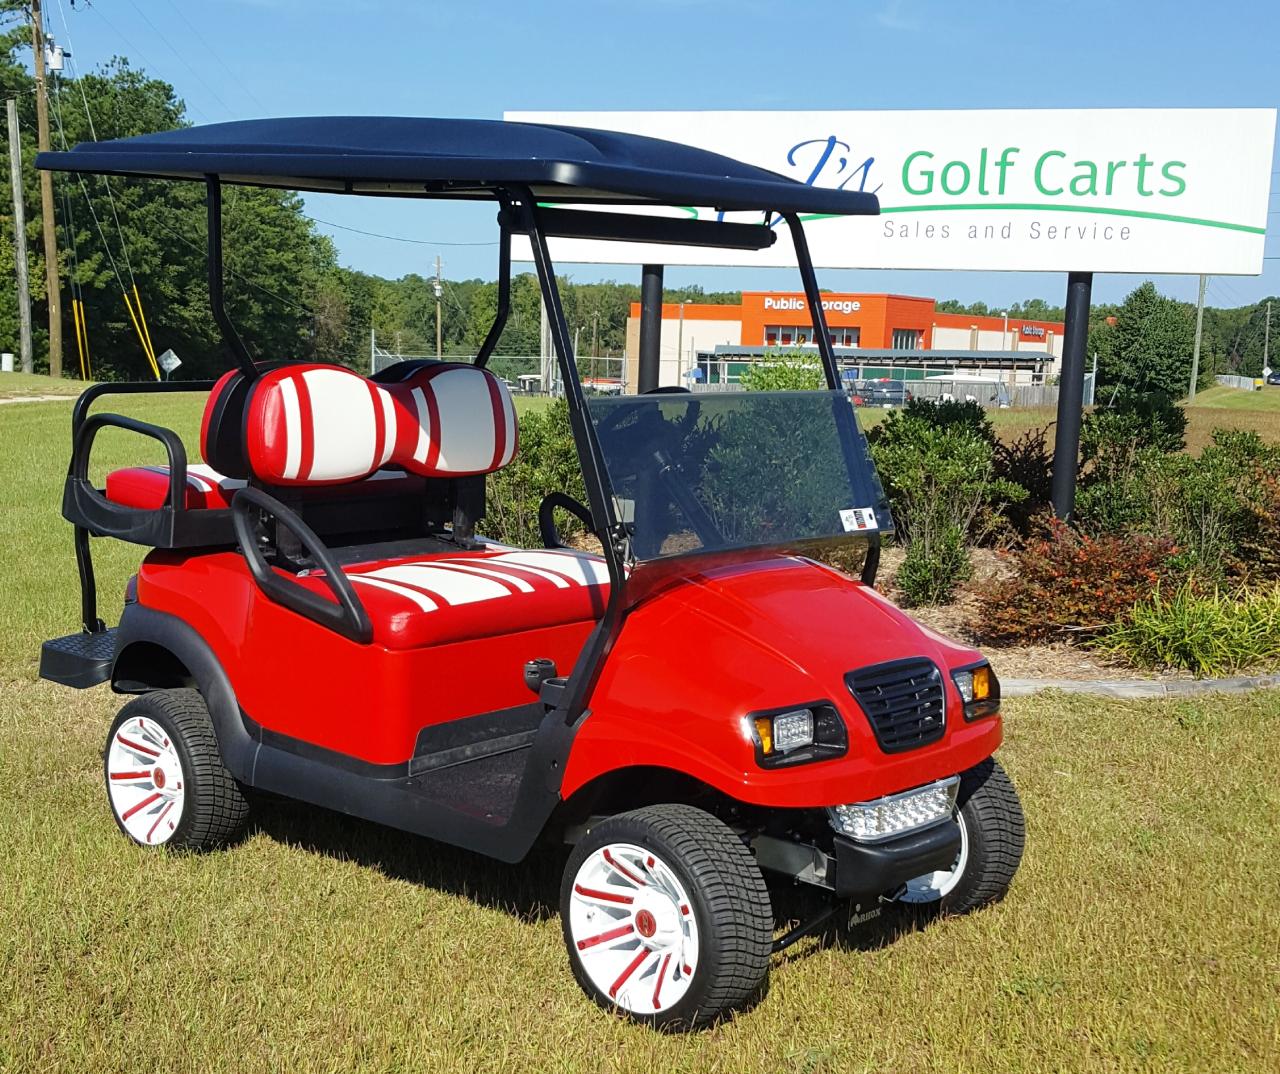 Used Golf Carts for Sale by Owner in Madison, Mississippi: Your Ride to Adventure